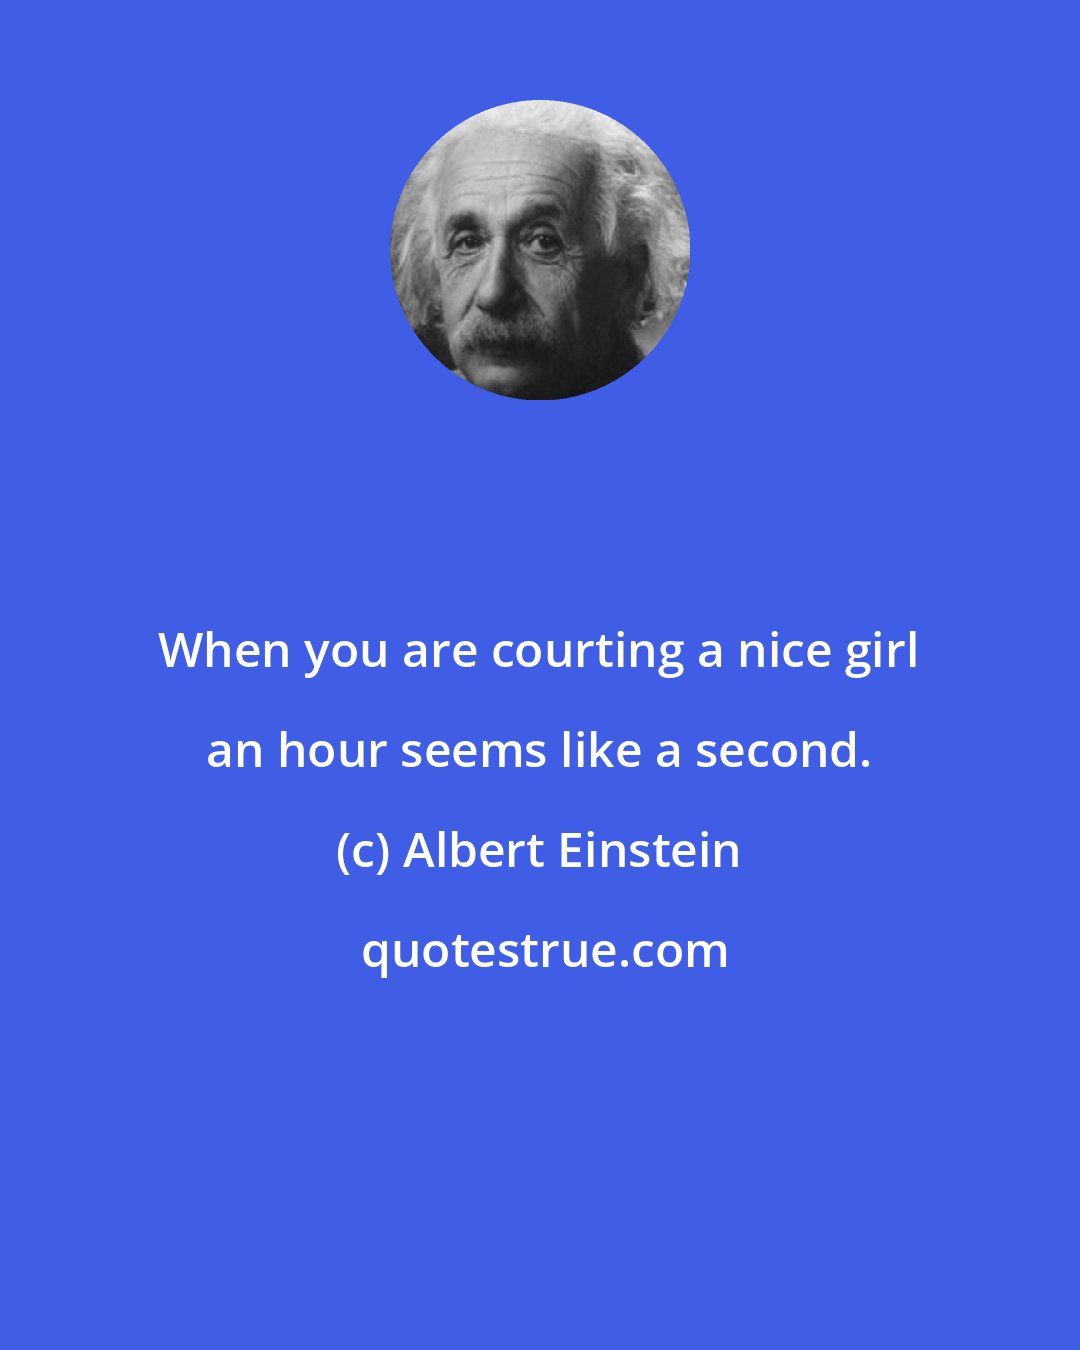 Albert Einstein: When you are courting a nice girl an hour seems like a second.